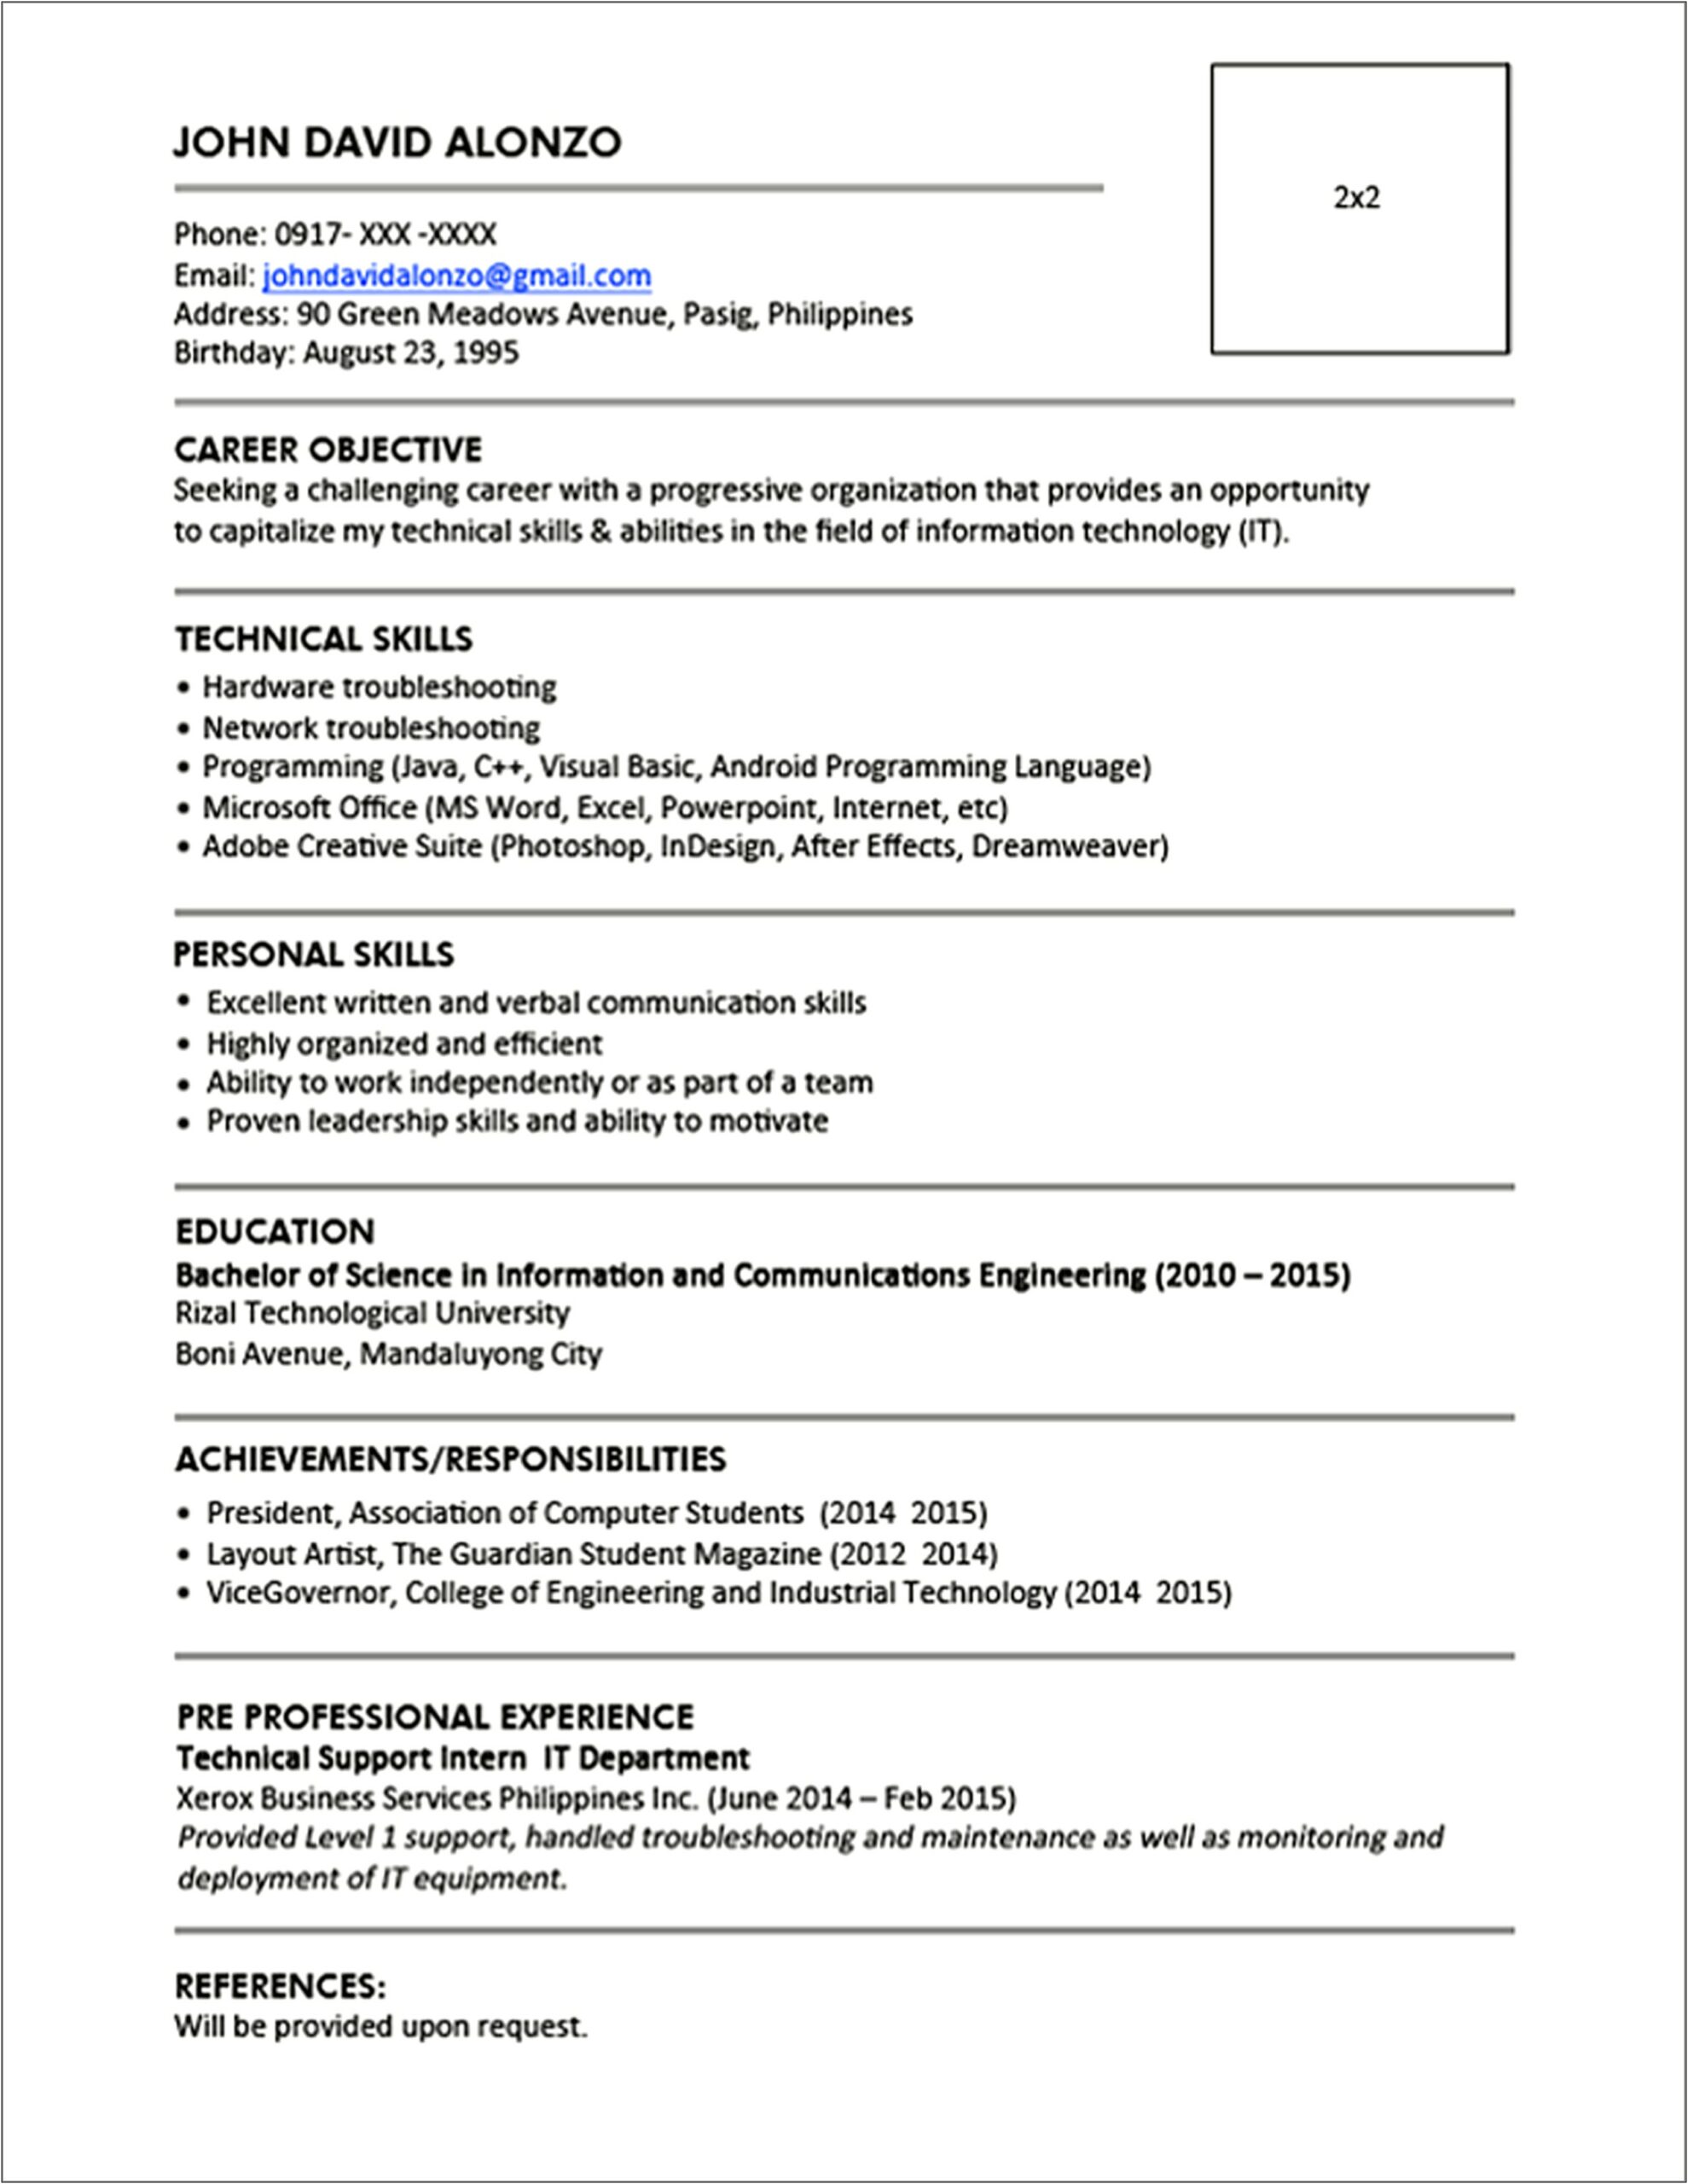 Sample Resume Reference Page Template